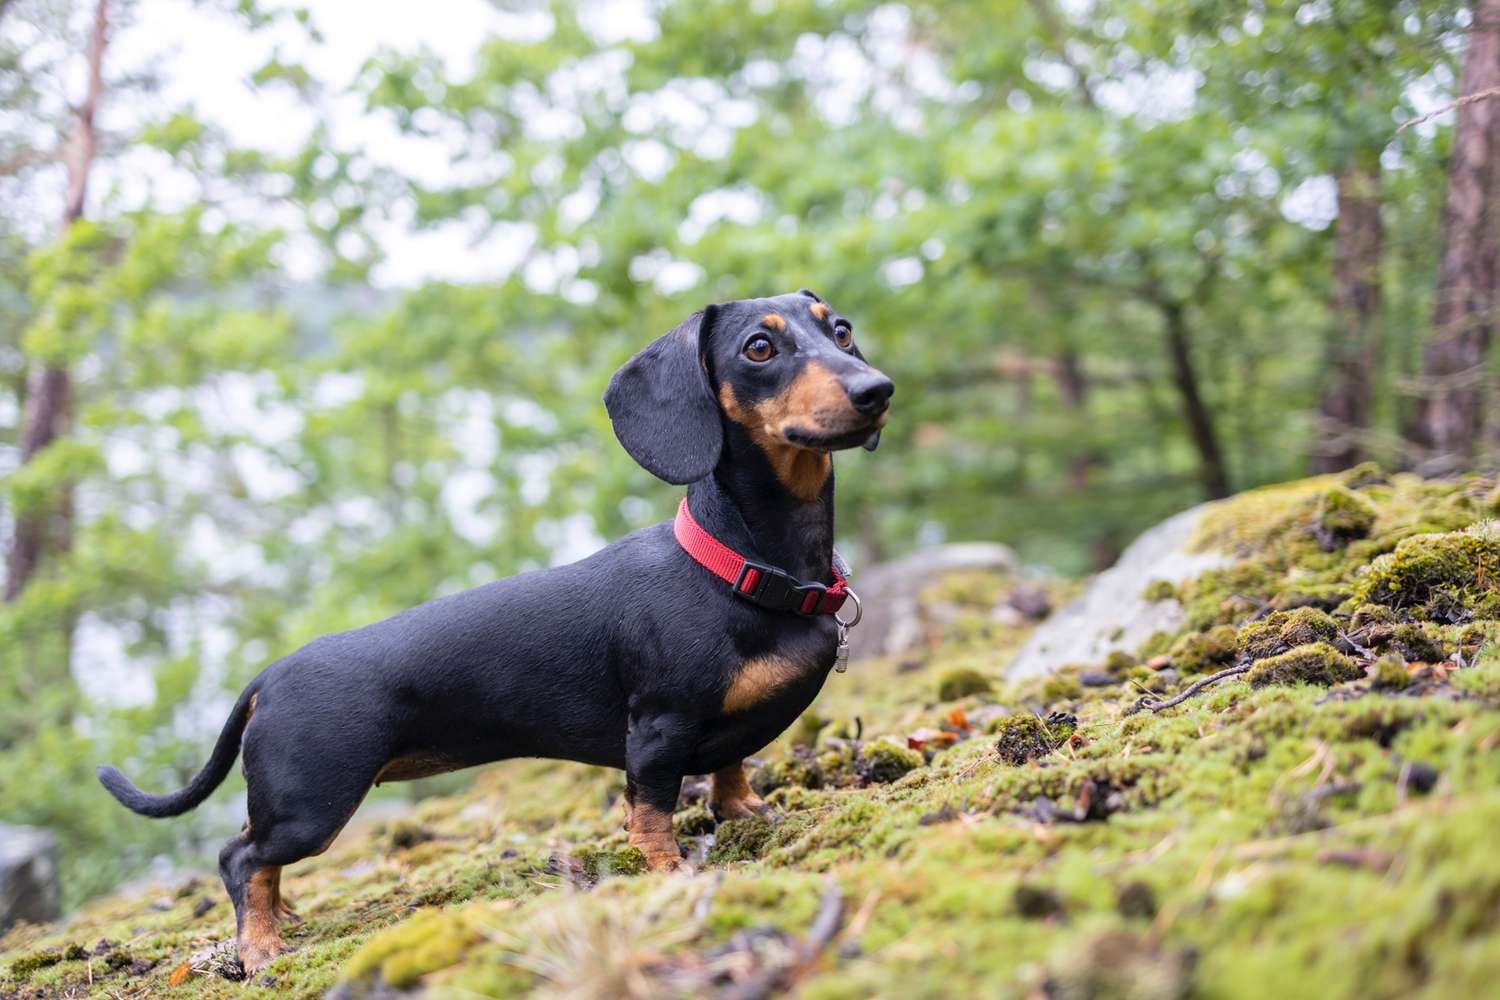 dachshund dog with red collar